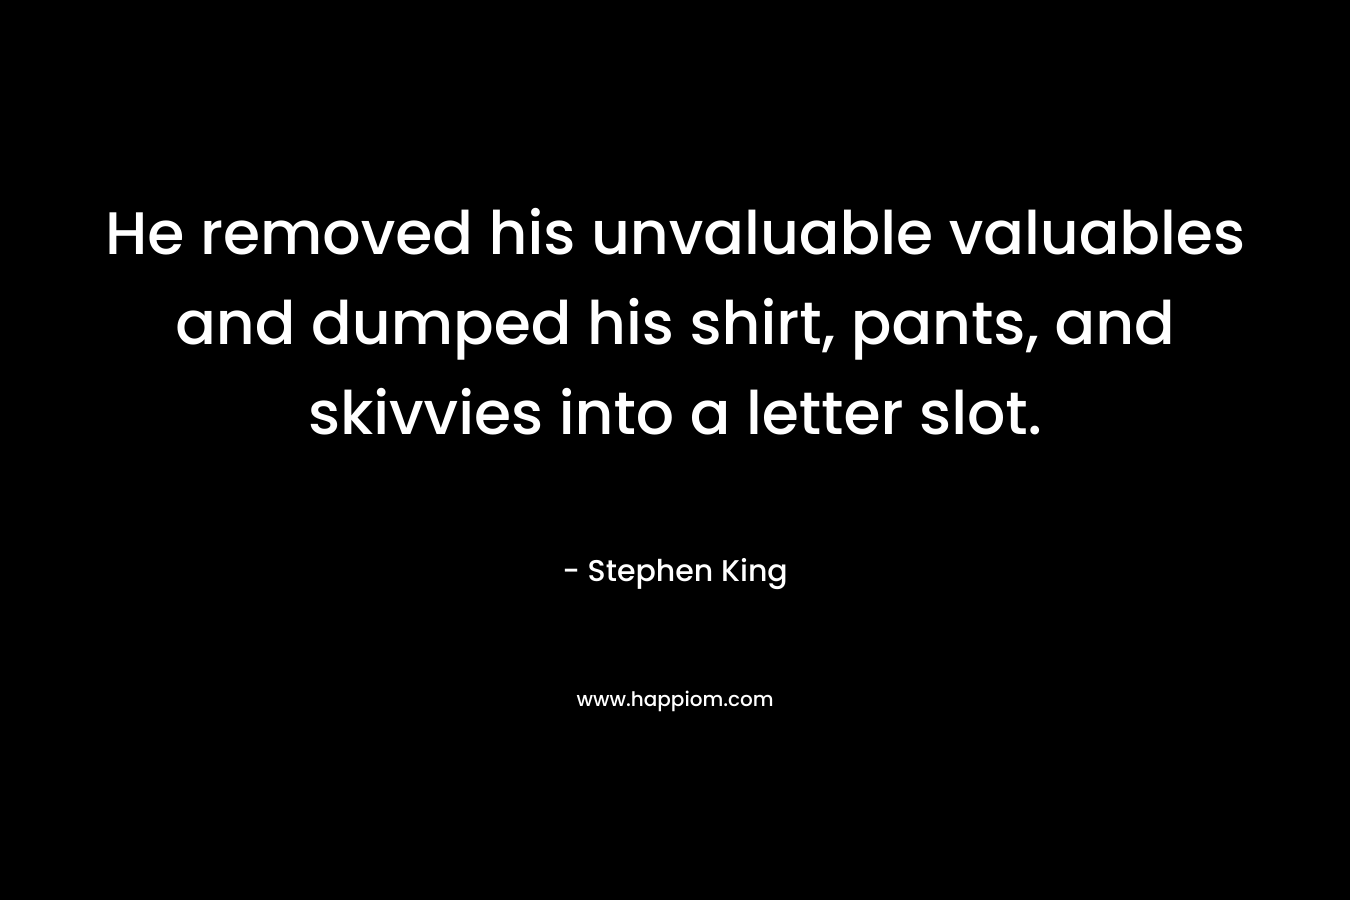 He removed his unvaluable valuables and dumped his shirt, pants, and skivvies into a letter slot. – Stephen King